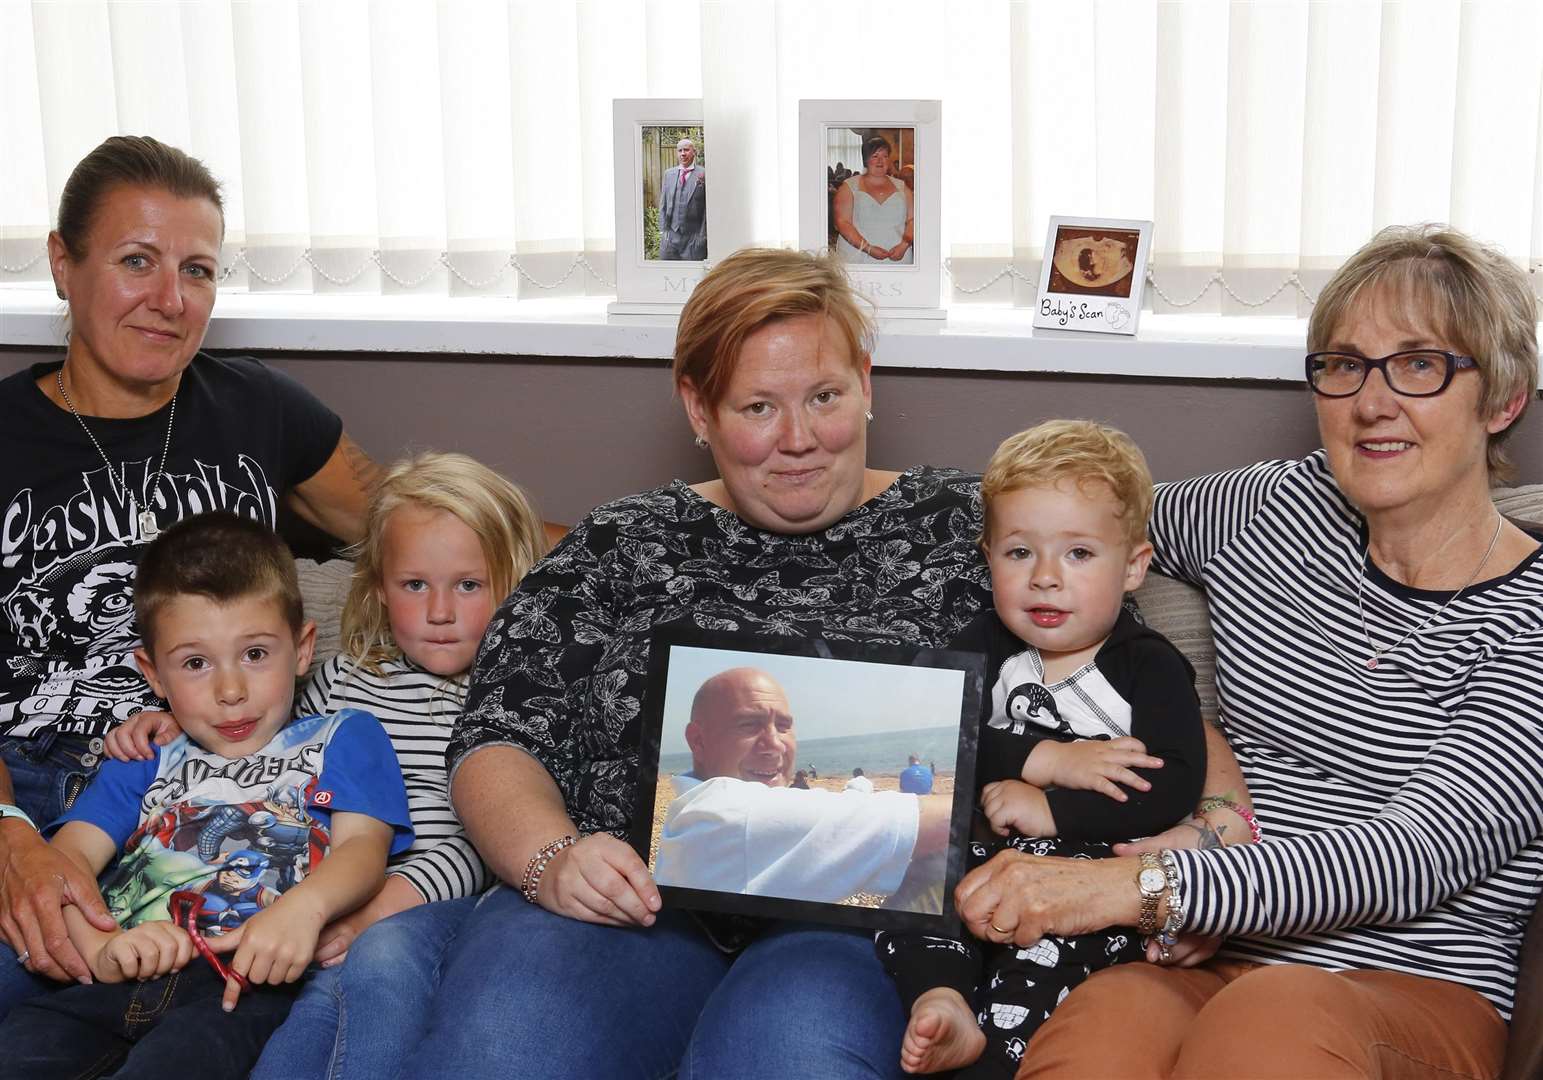 Jason Mills’ family, from left, Tracey Calnan, Dougie Webb, Evie Mills, Laura Mills, Reggie Mills and Val Priston